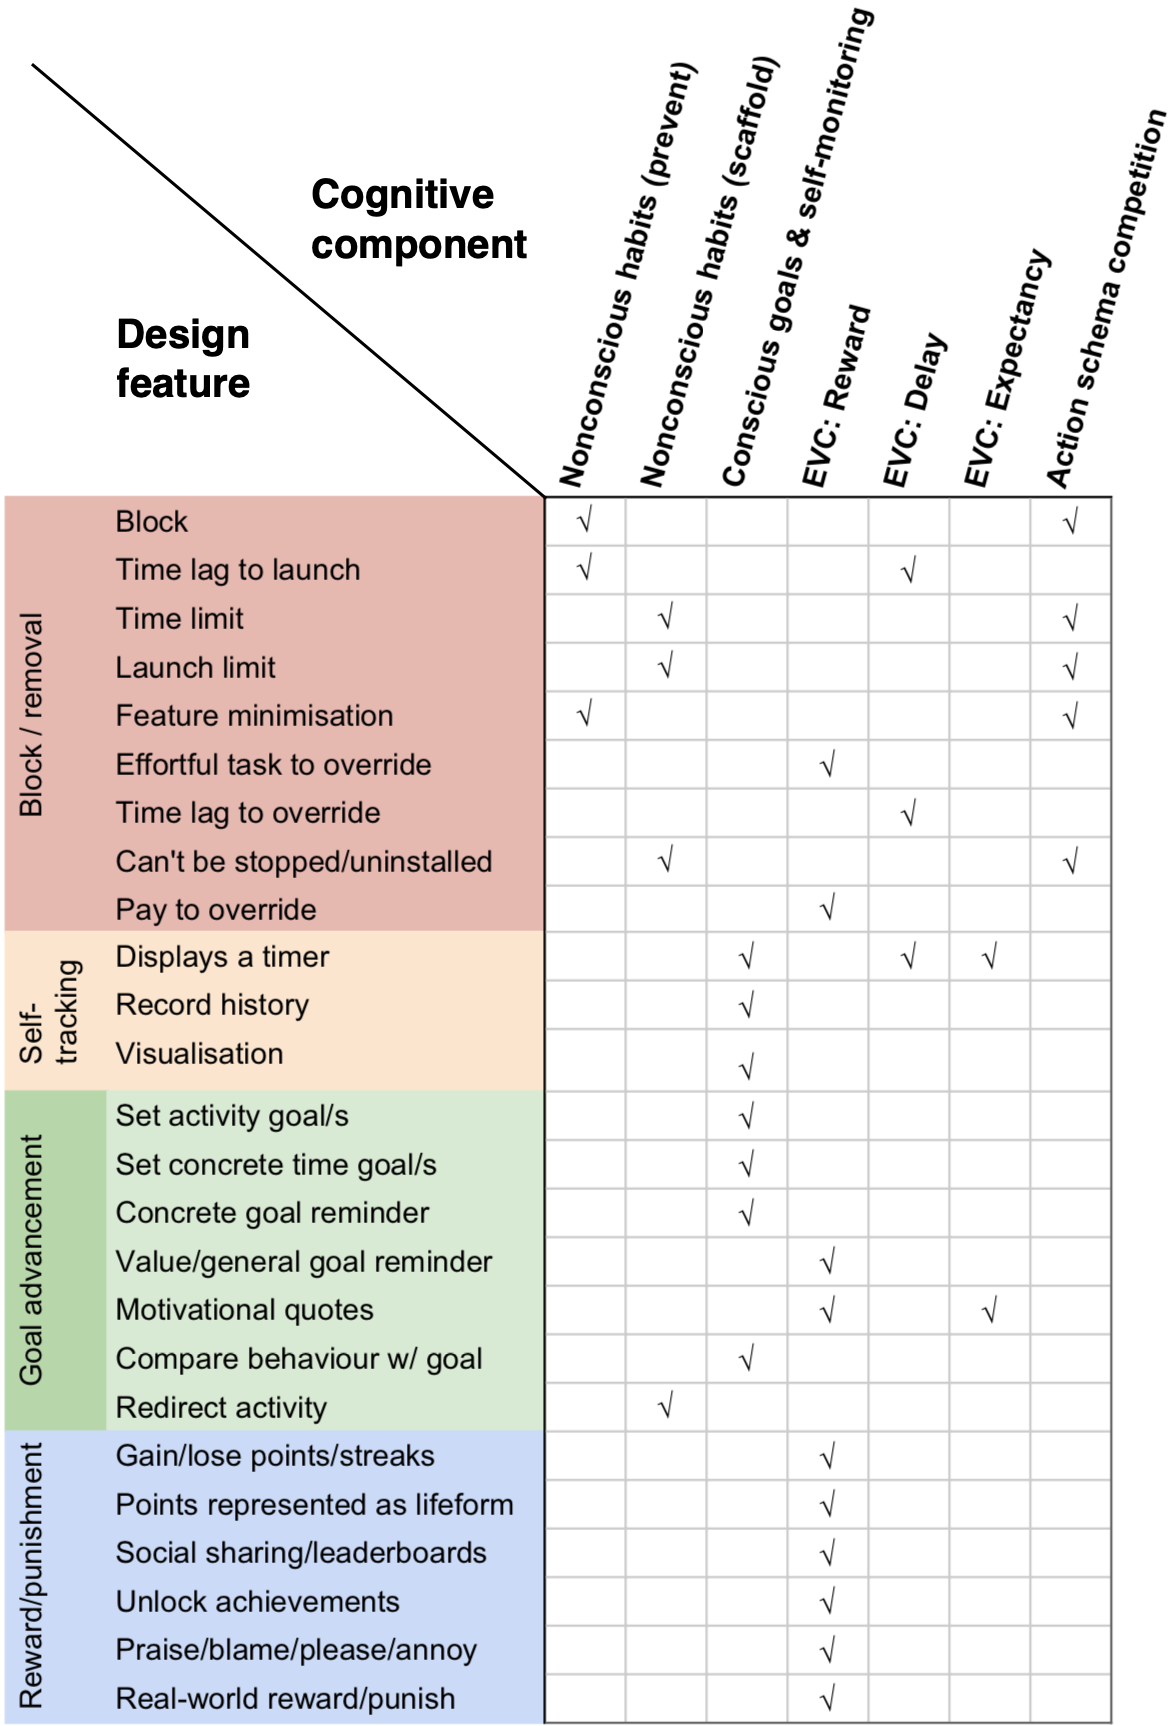 Mapping of design features to an integrative dual systems model of self-regulation